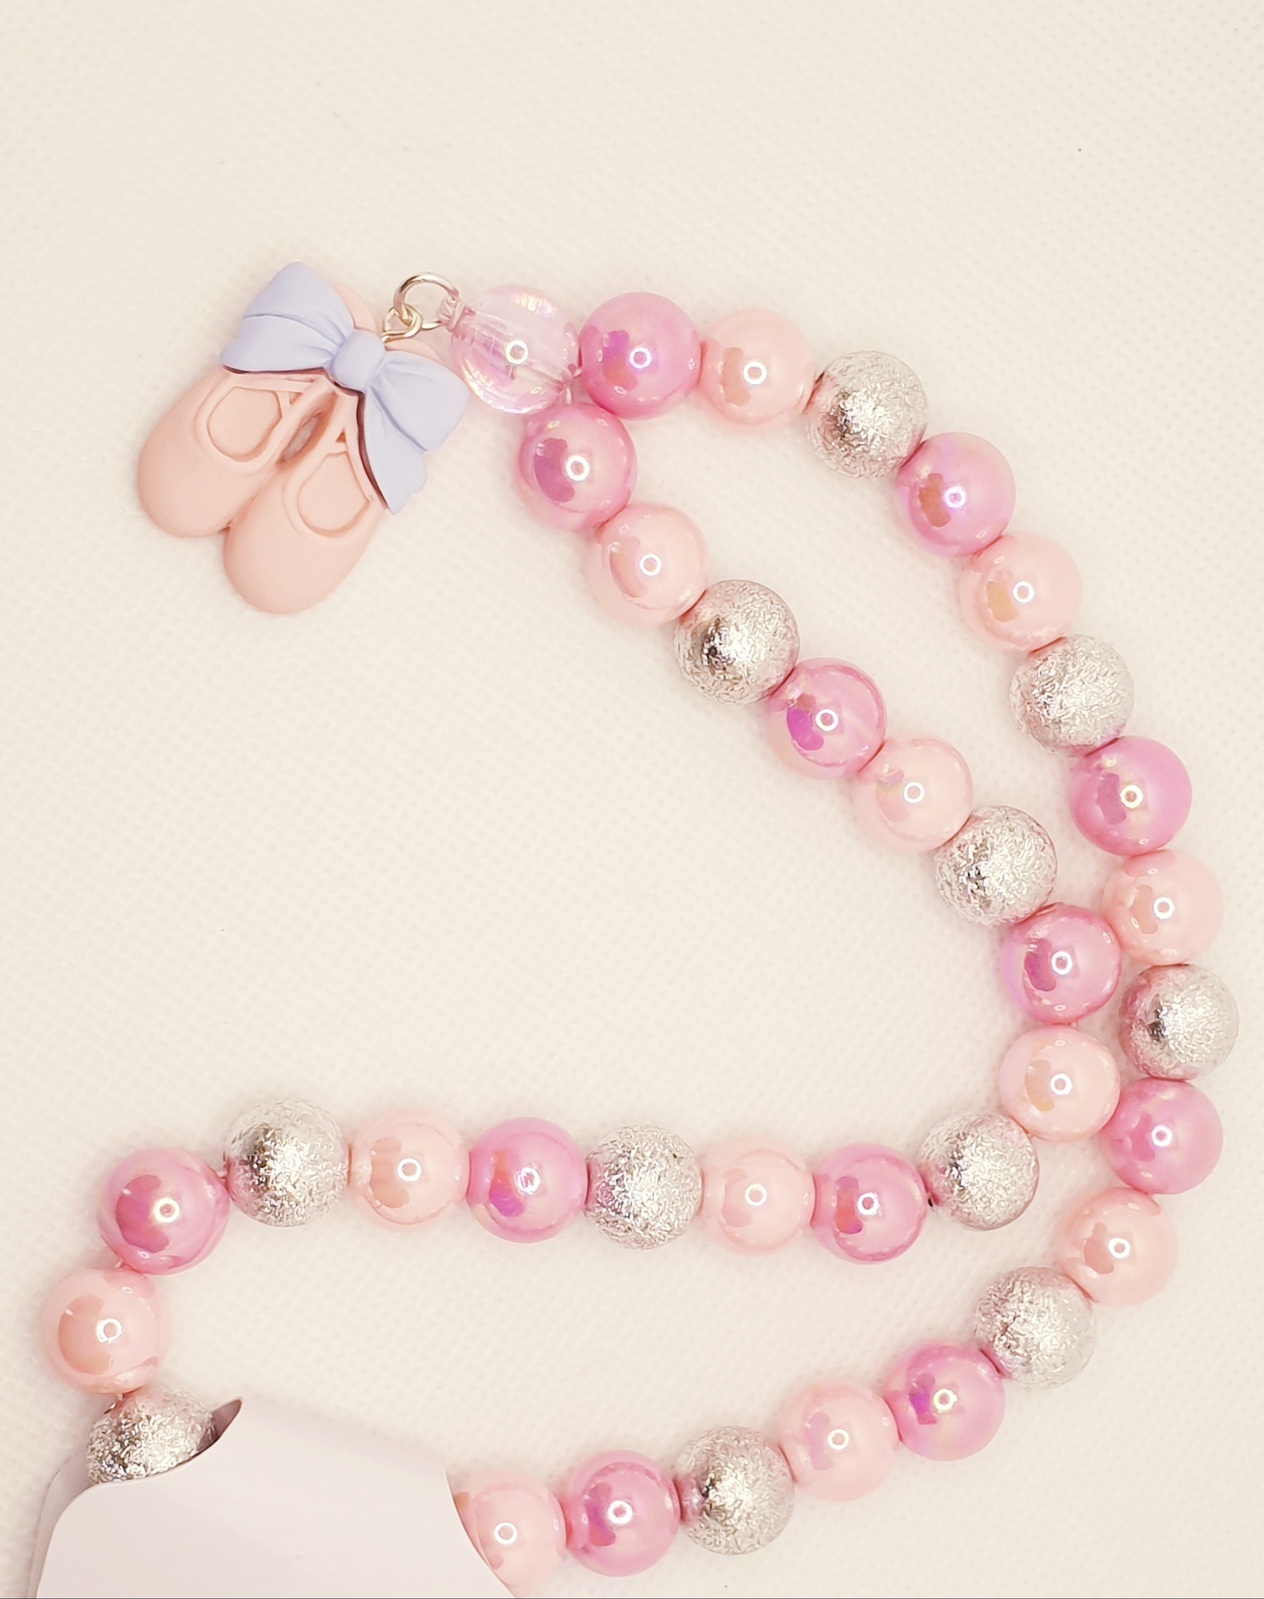 Beaded Pink Ballet Shoe Necklace